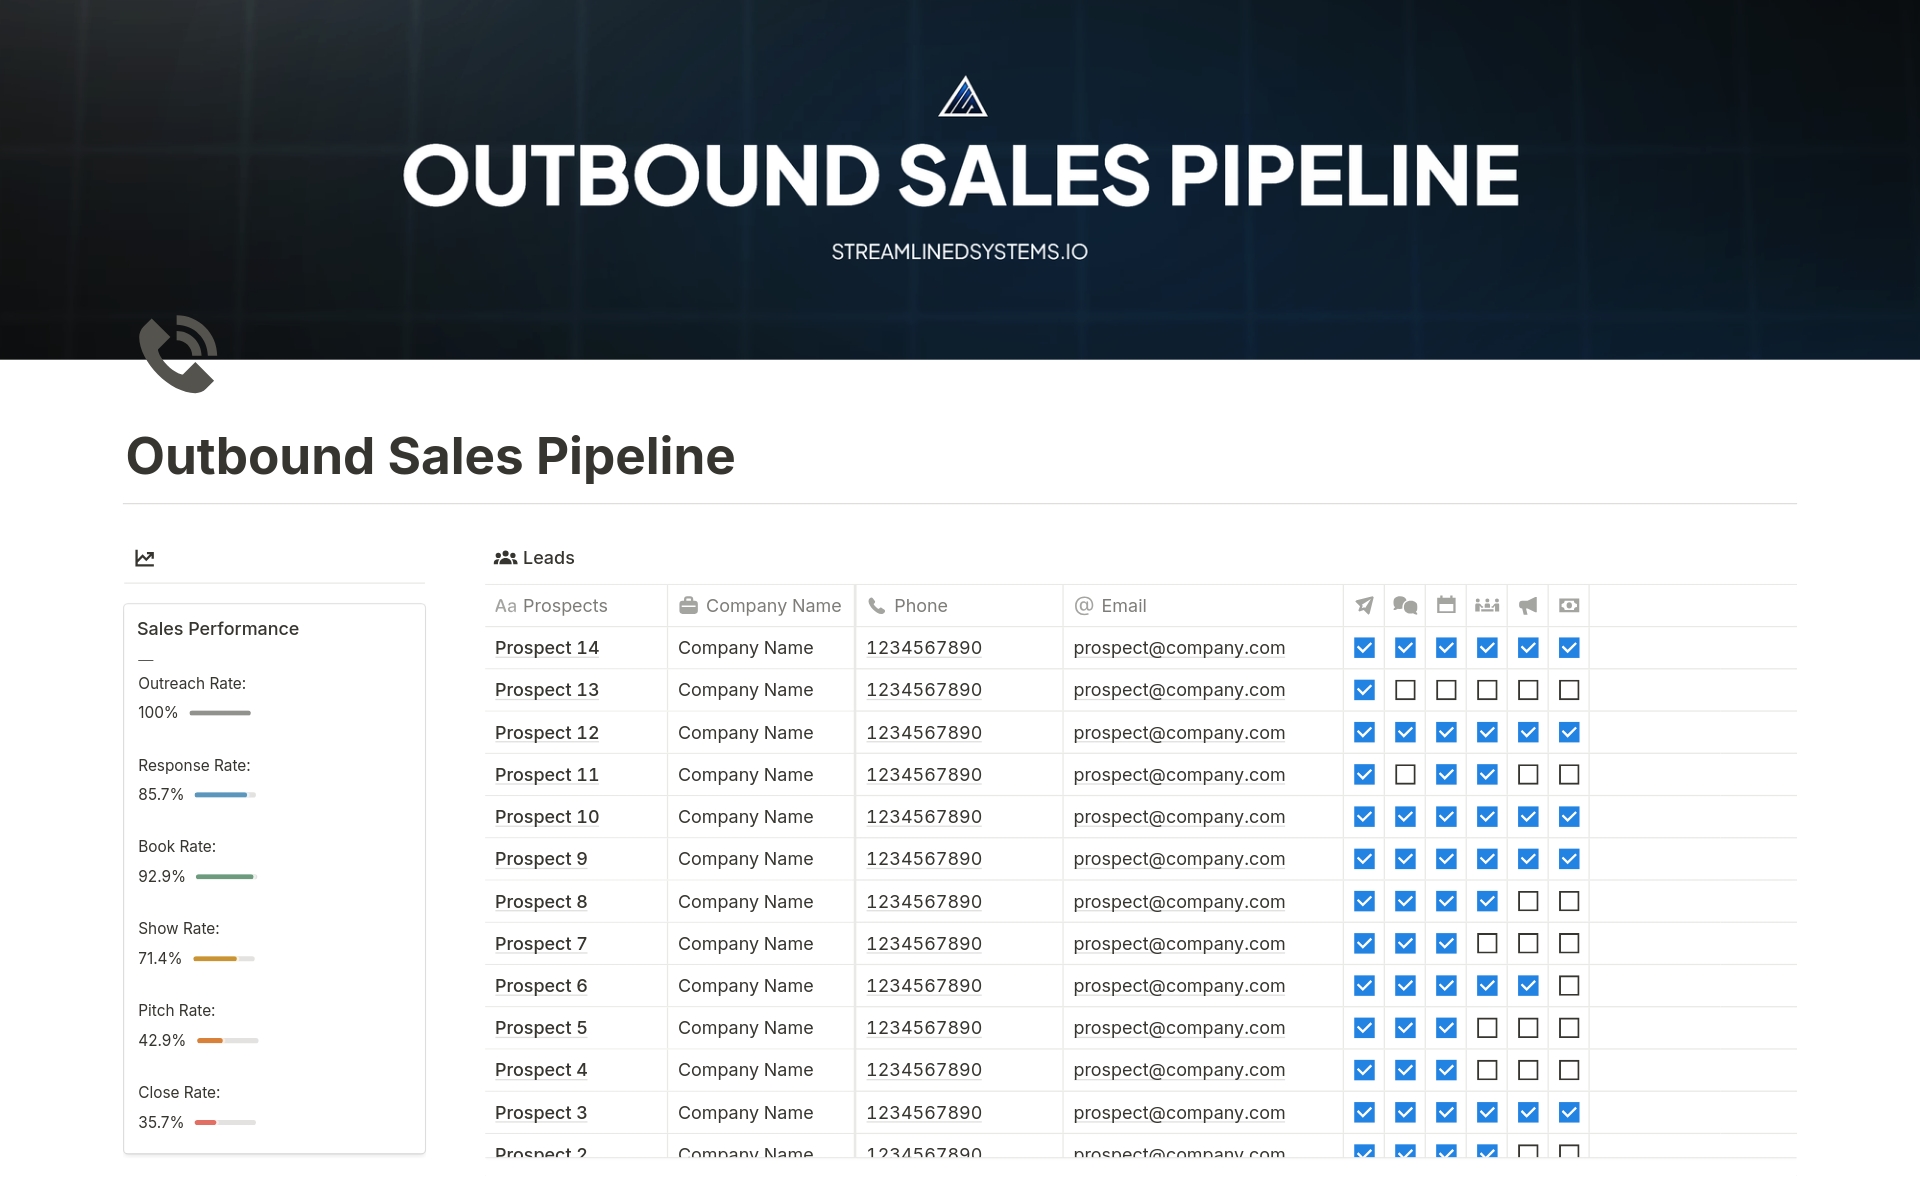 Monitor and manage your sales activities and pipelines.